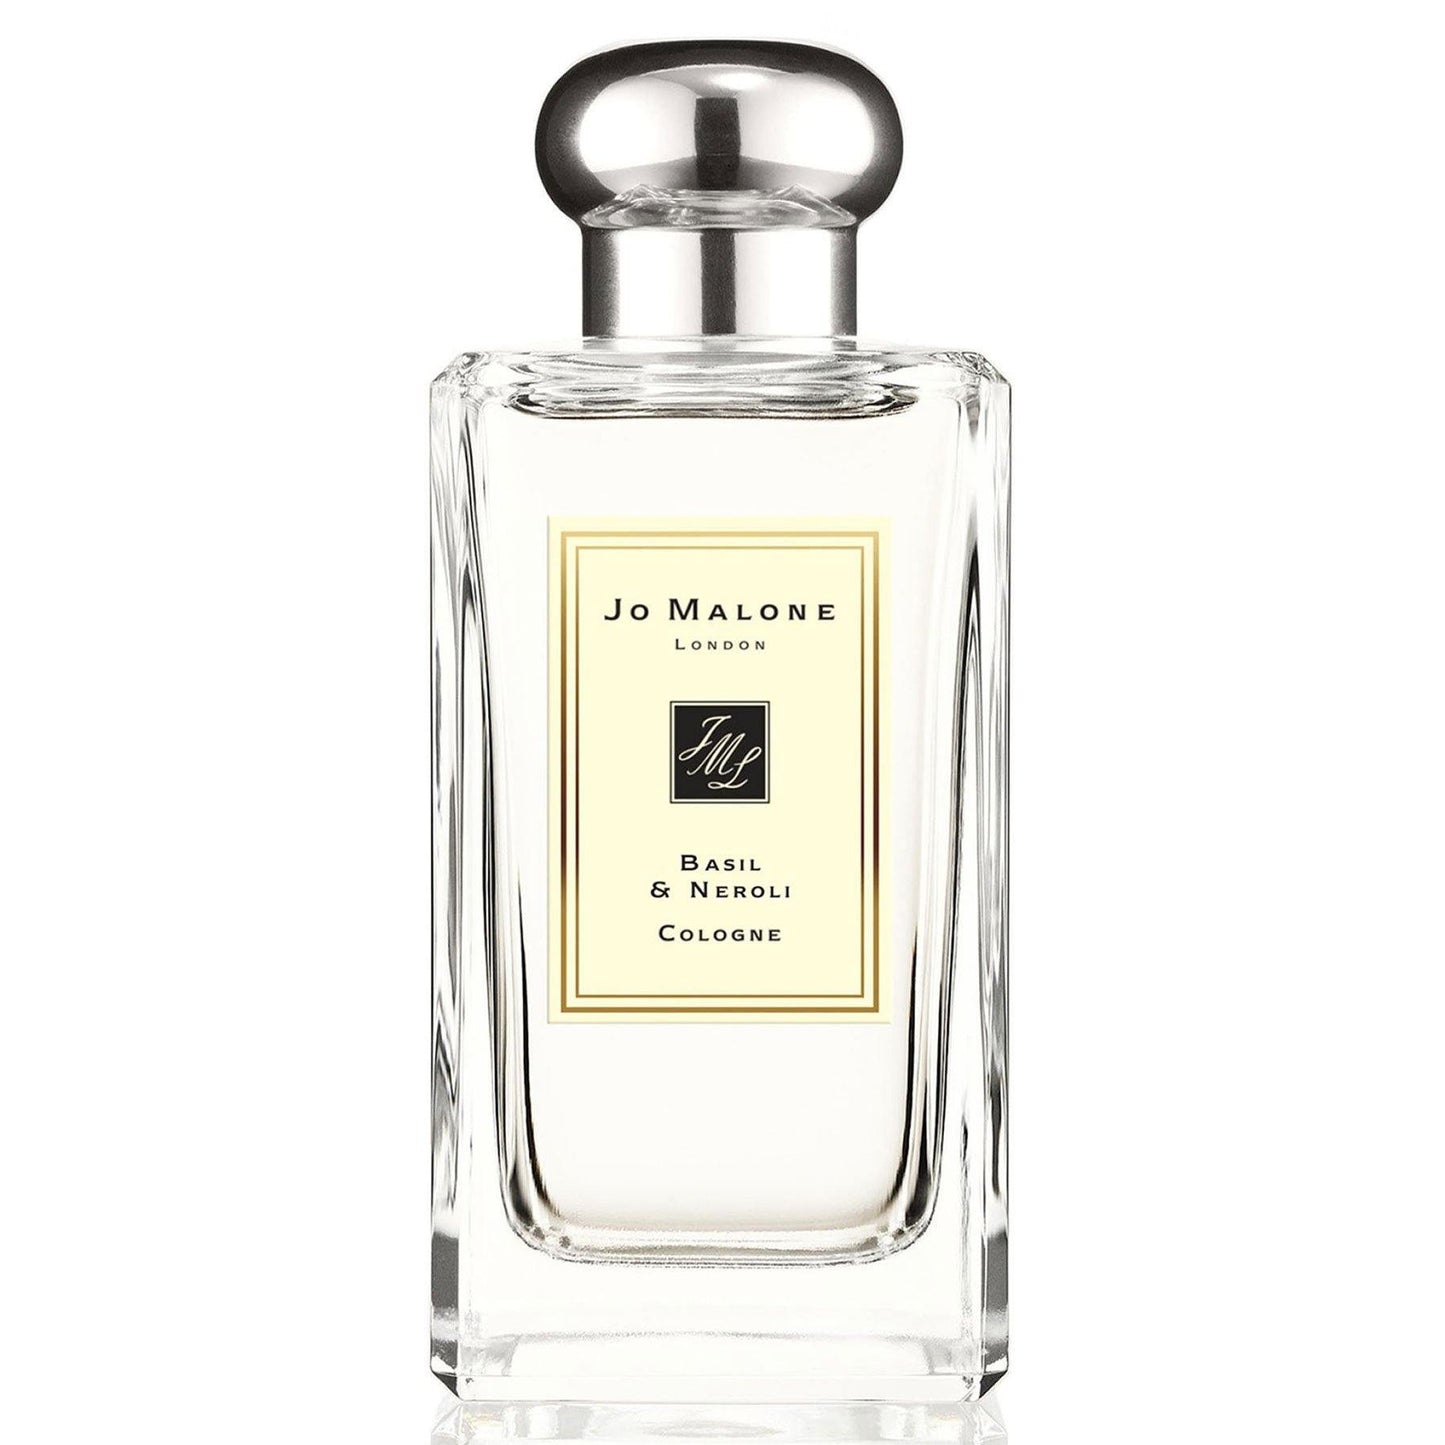 Basil & Neroli Cologne - Cosmos Boutique New Jersey